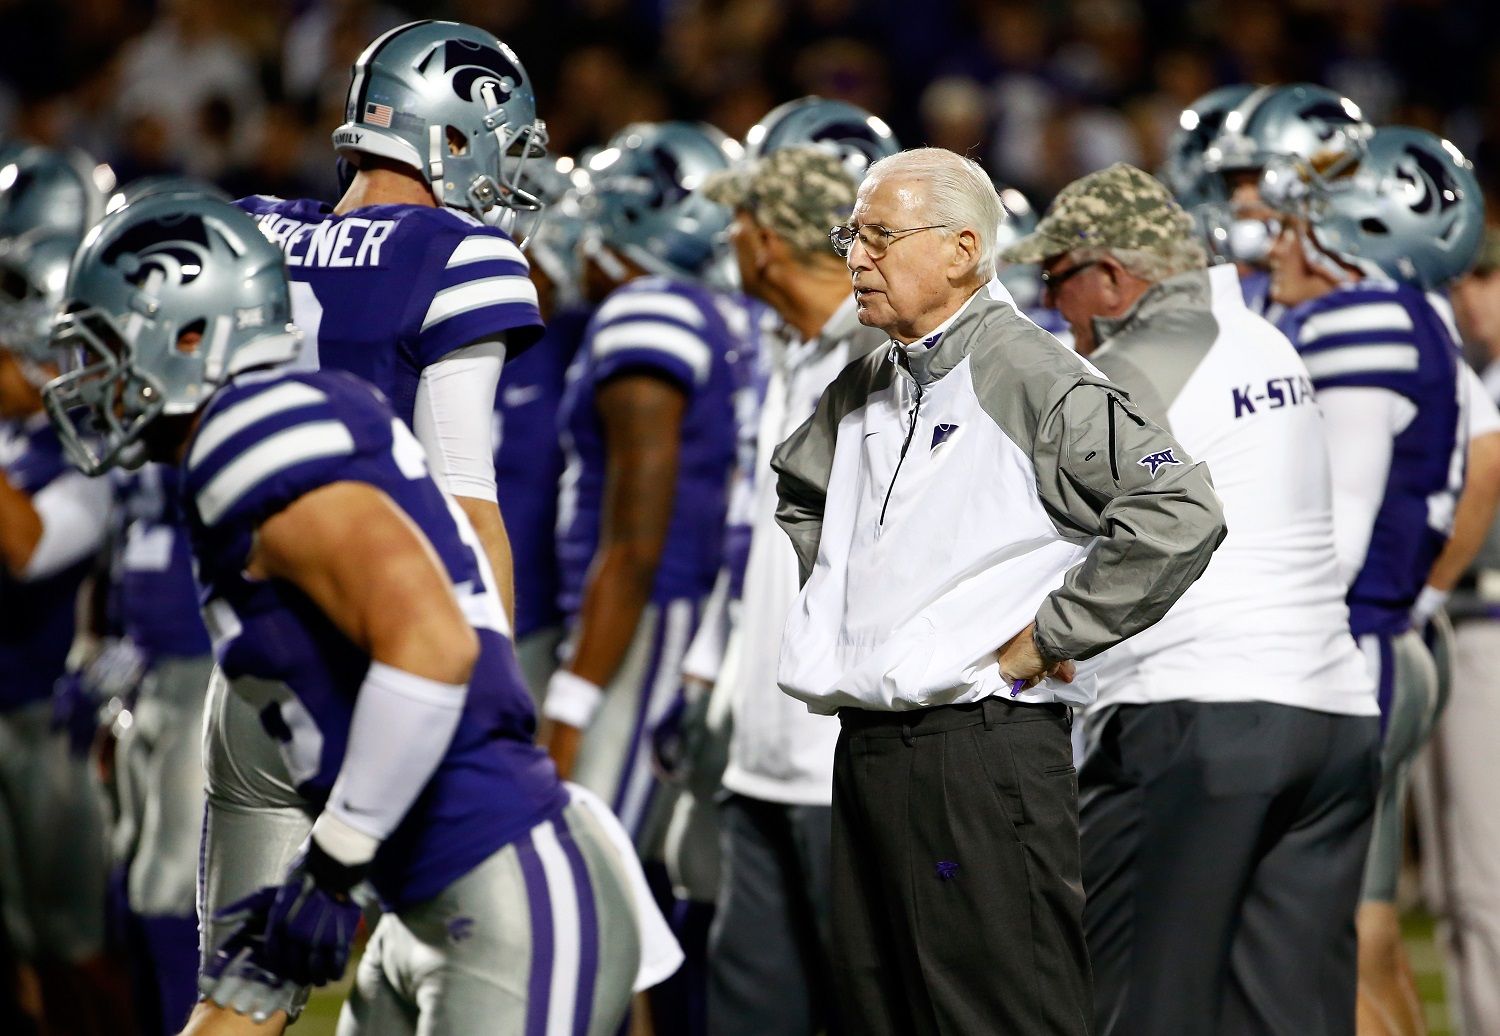 MANHATTAN, KS - NOVEMBER 05:  Head coach Bill Snyder of the Kansas State Wildcats watches during warm-ups prior to the game against the Baylor Bears at Bill Snyder Family Football Stadium on November 5, 2015 in Manhattan, Kansas.  (Photo by Jamie Squire/Getty Images)